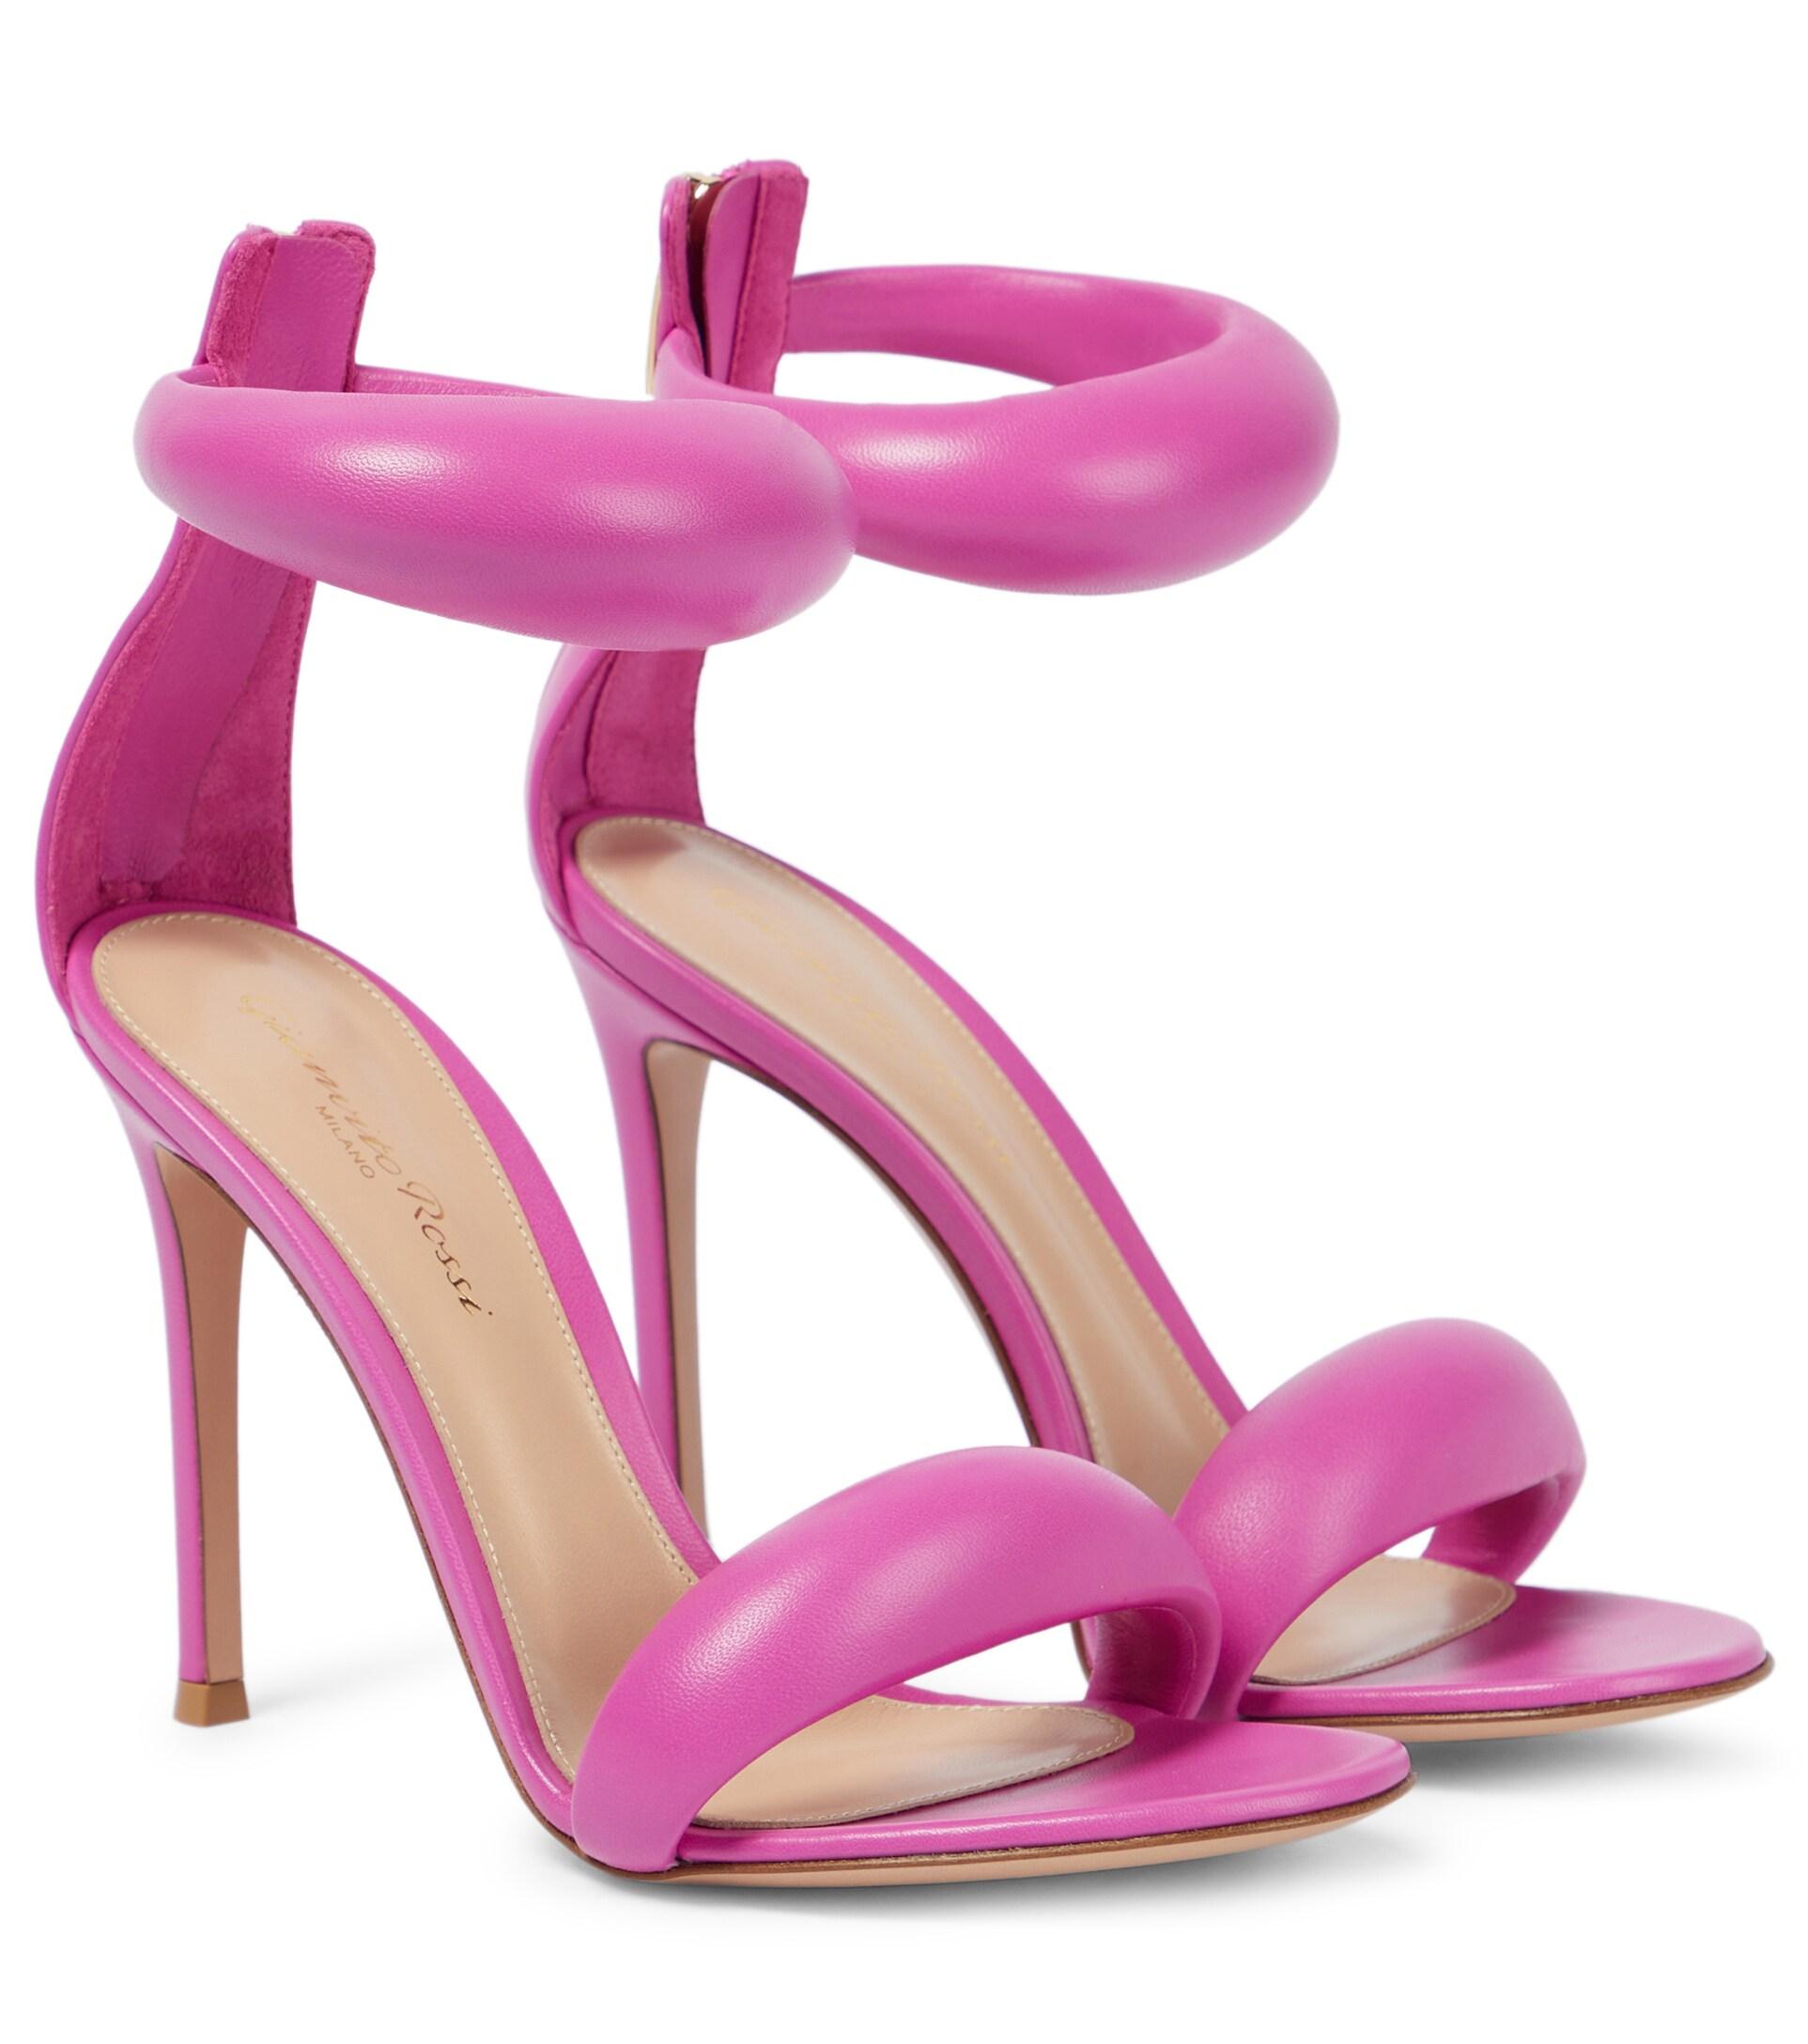 Gianvito Rossi Bijoux 105 Leather Sandals in Pink | Lyst